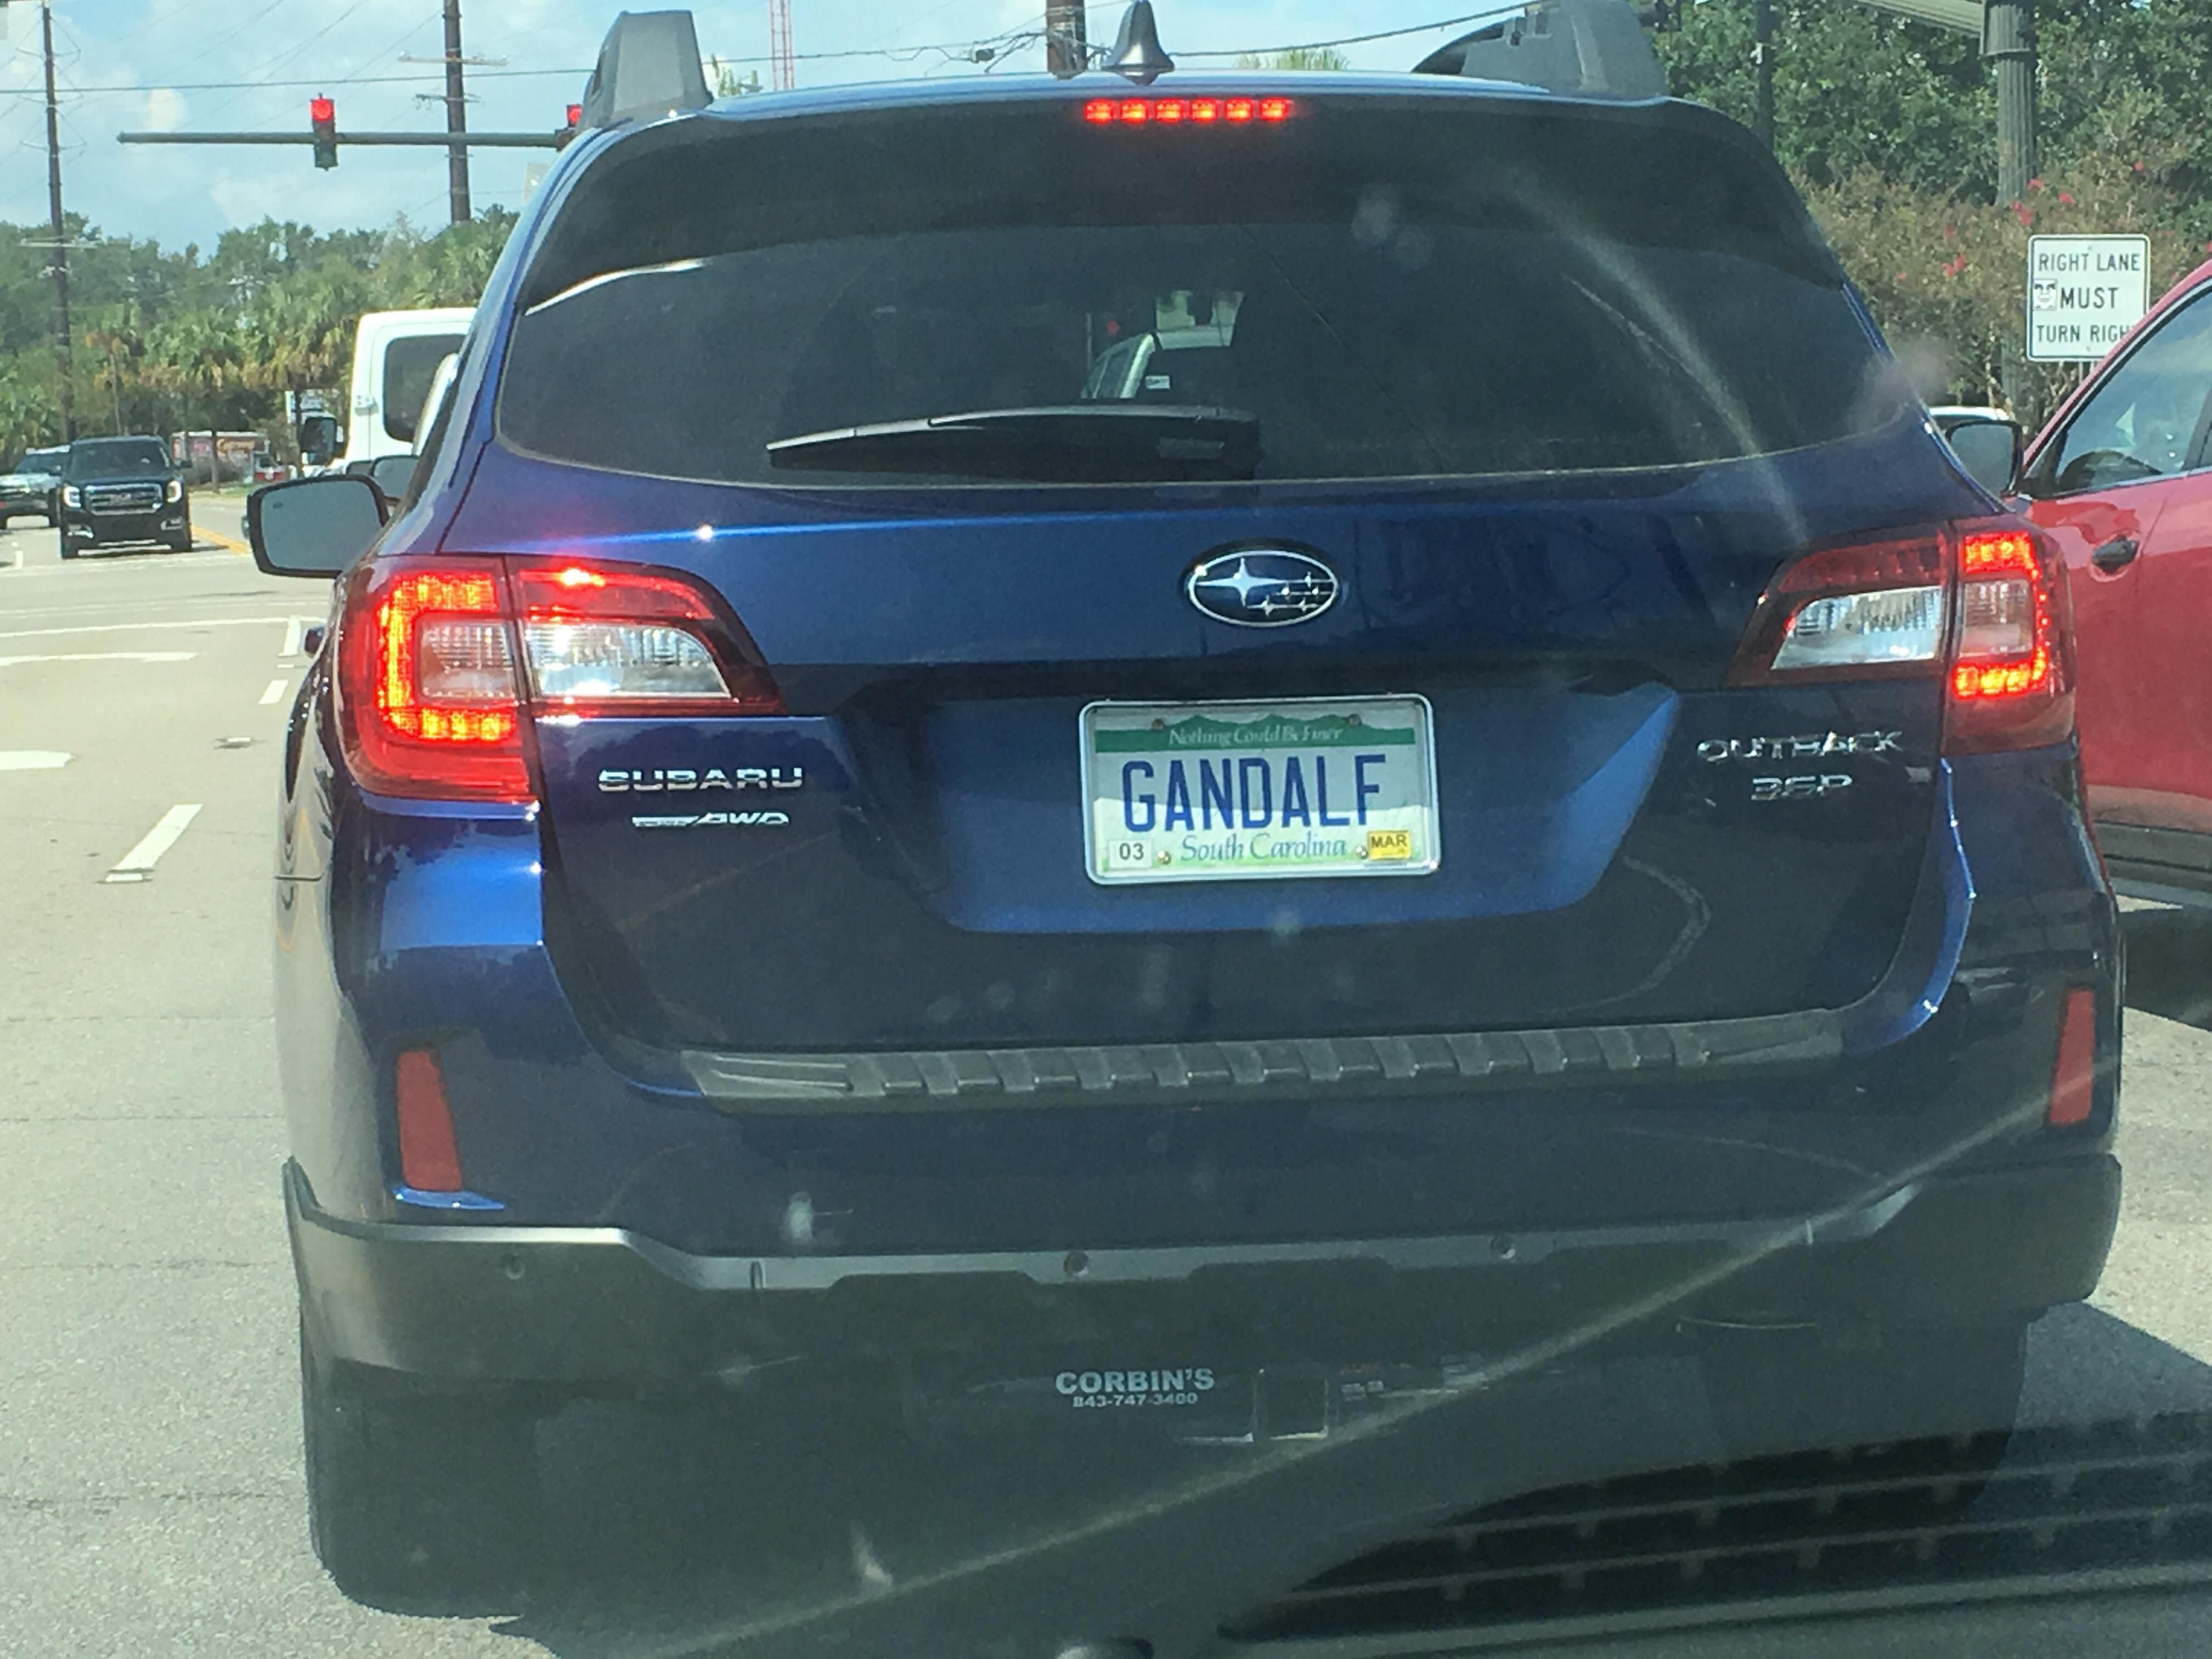 Was unable to pass this driver today.